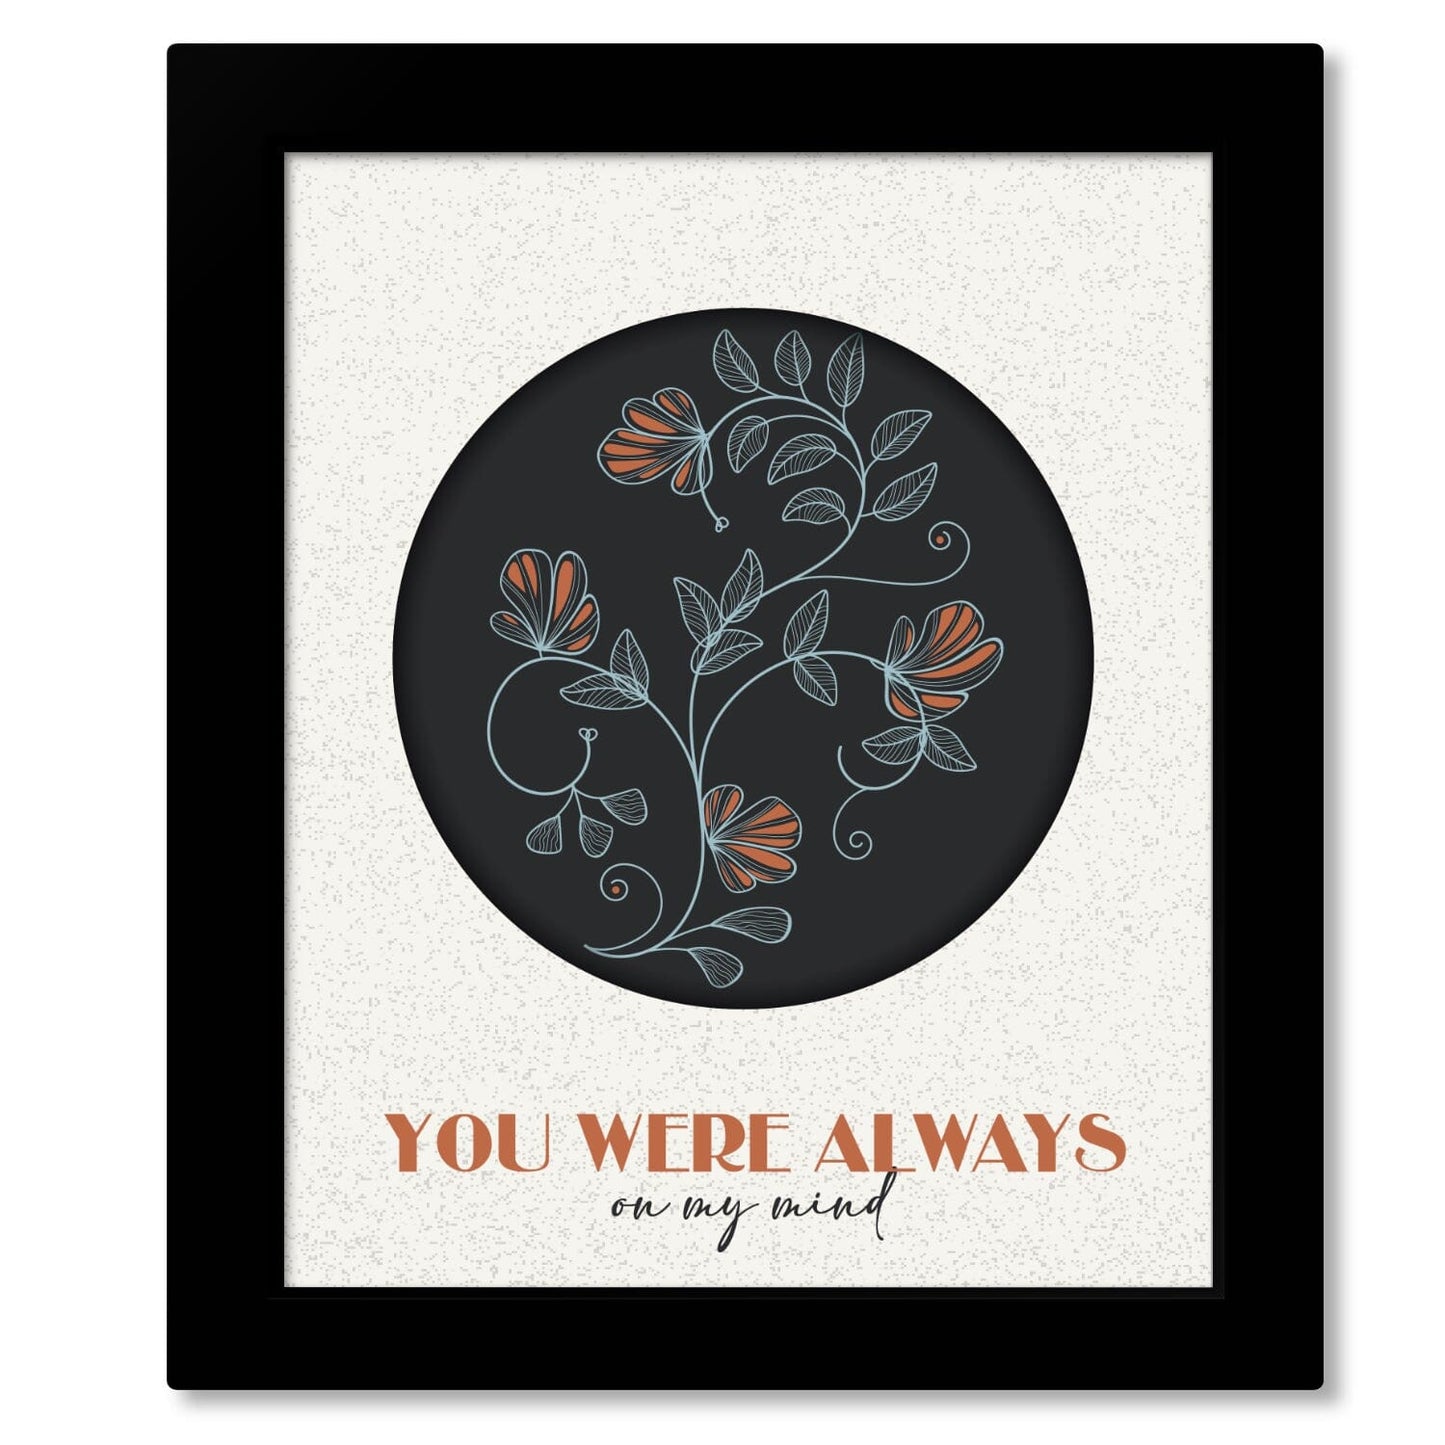 You Were Always on my Mind by Willie Nelson - Song Lyric Art Song Lyrics Art Song Lyrics Art 8x10 Framed Print (without mat) 